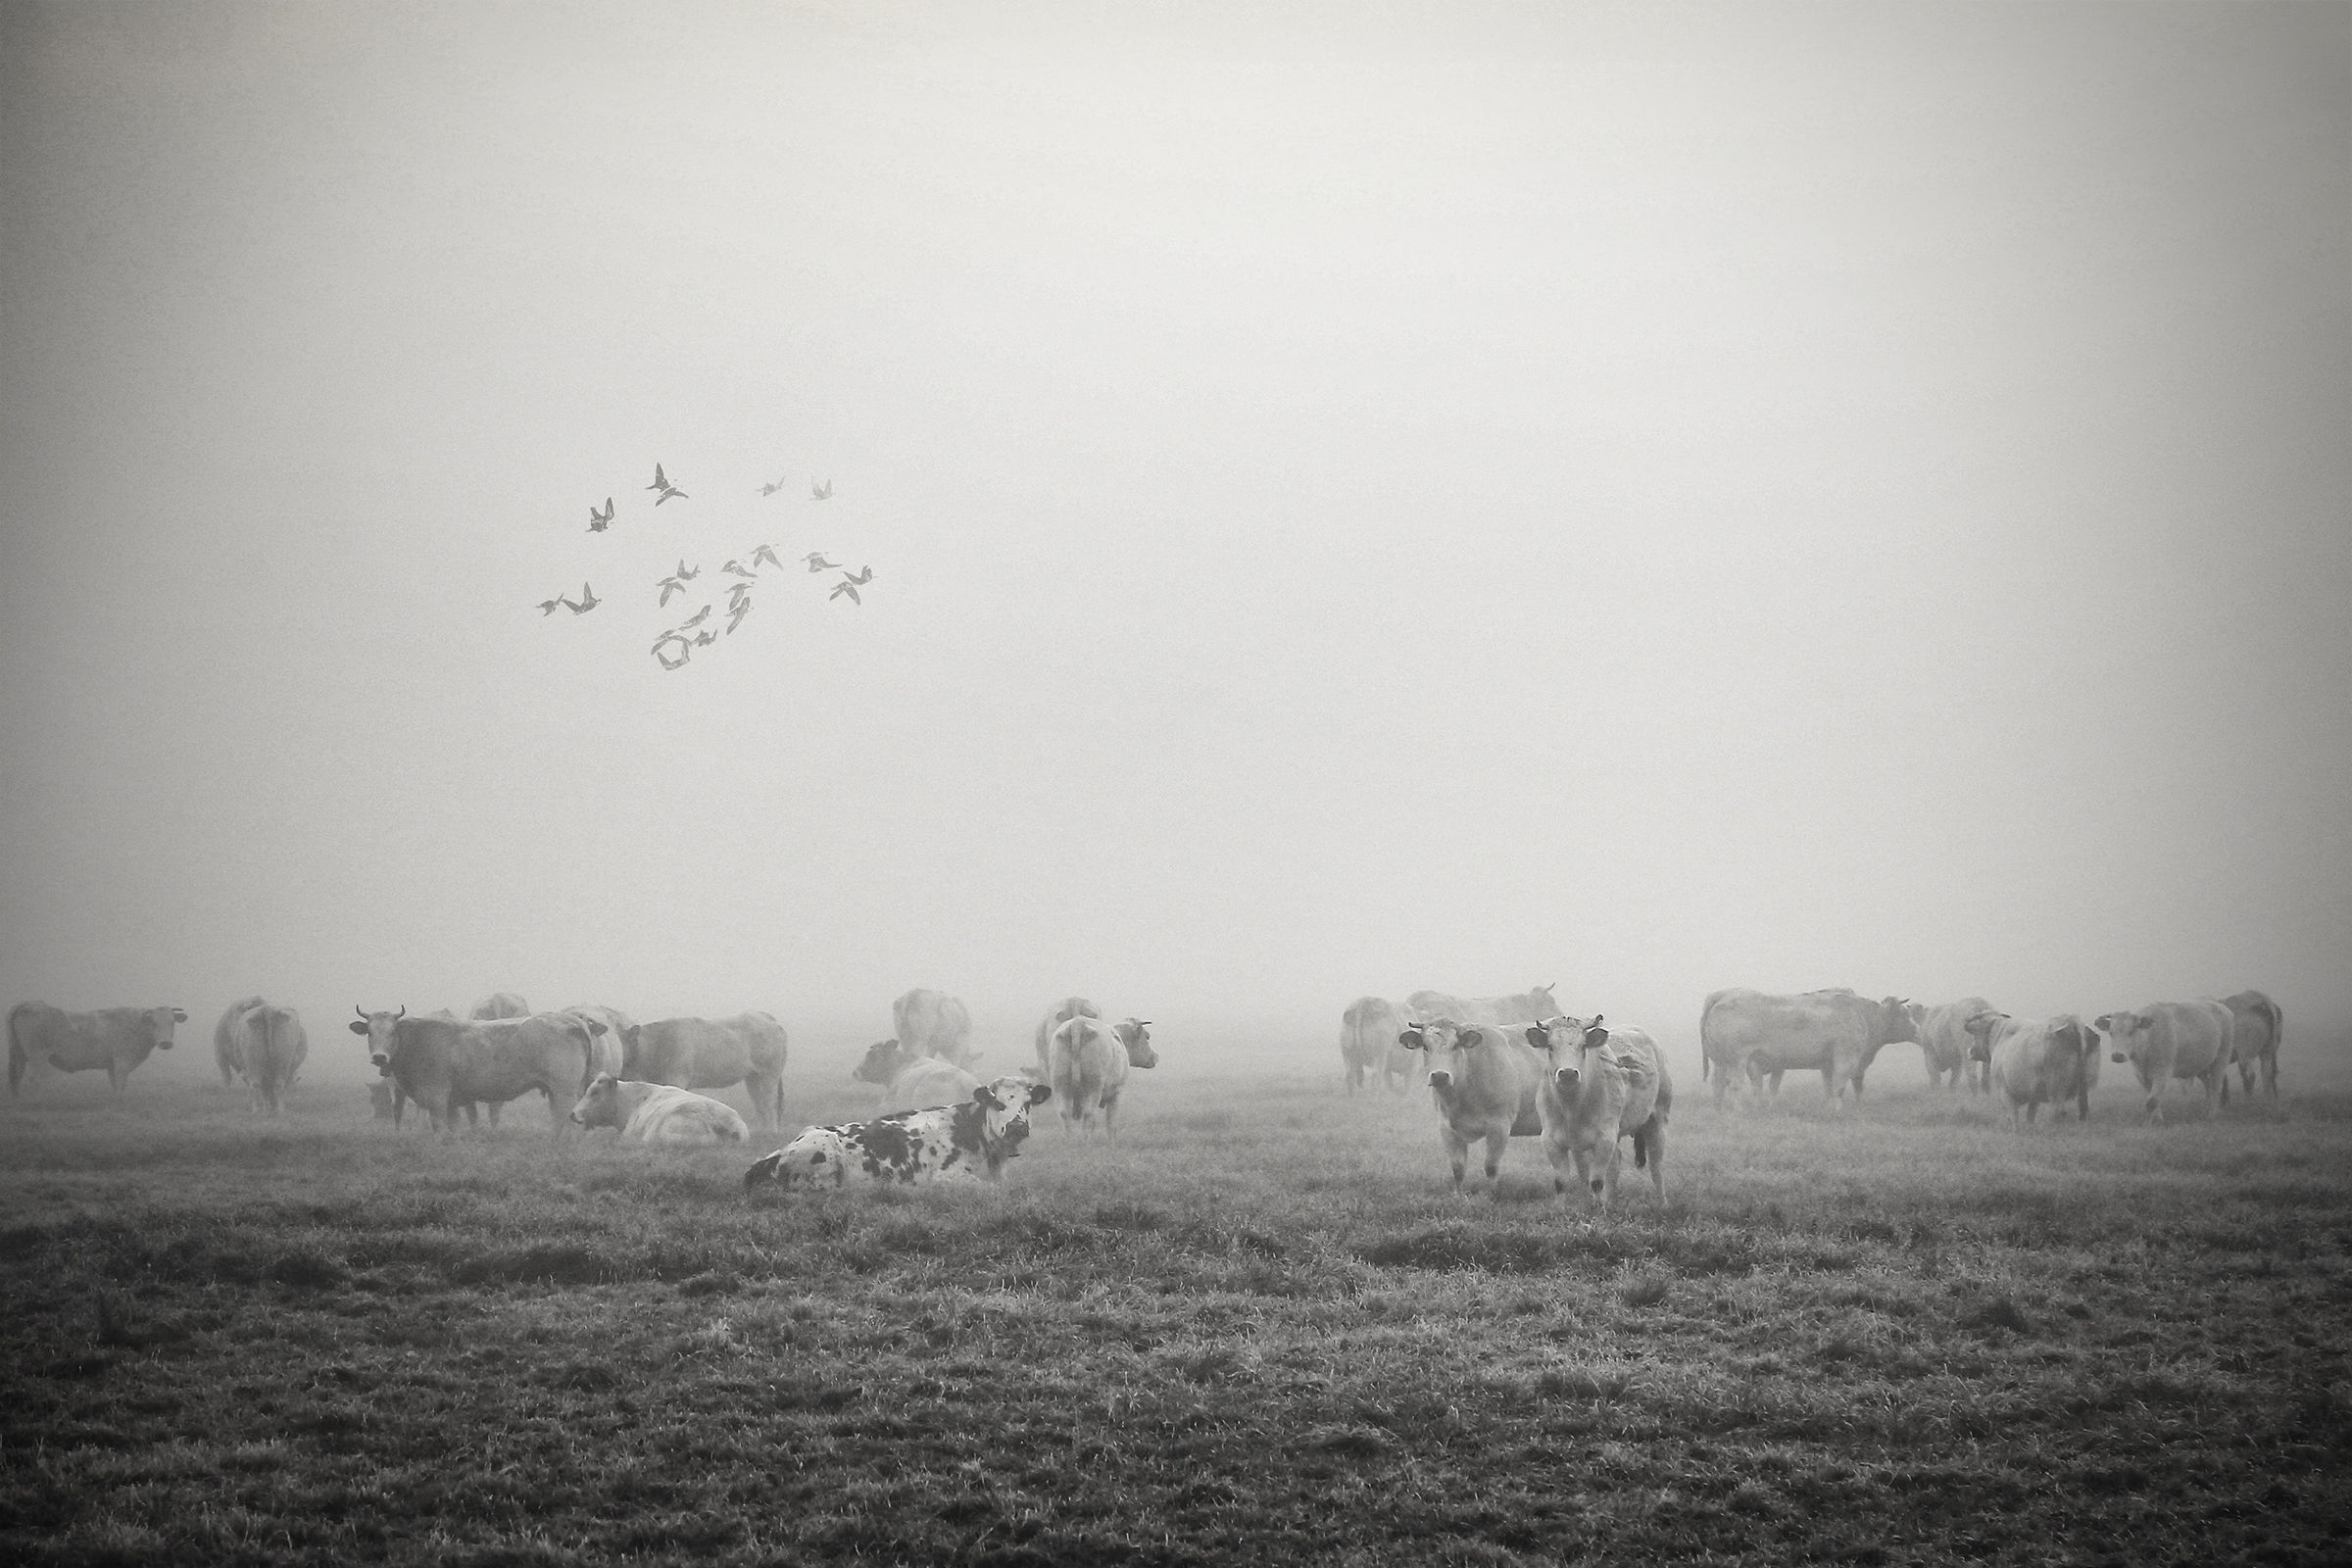 Cows in the fog or fog in the cows?...